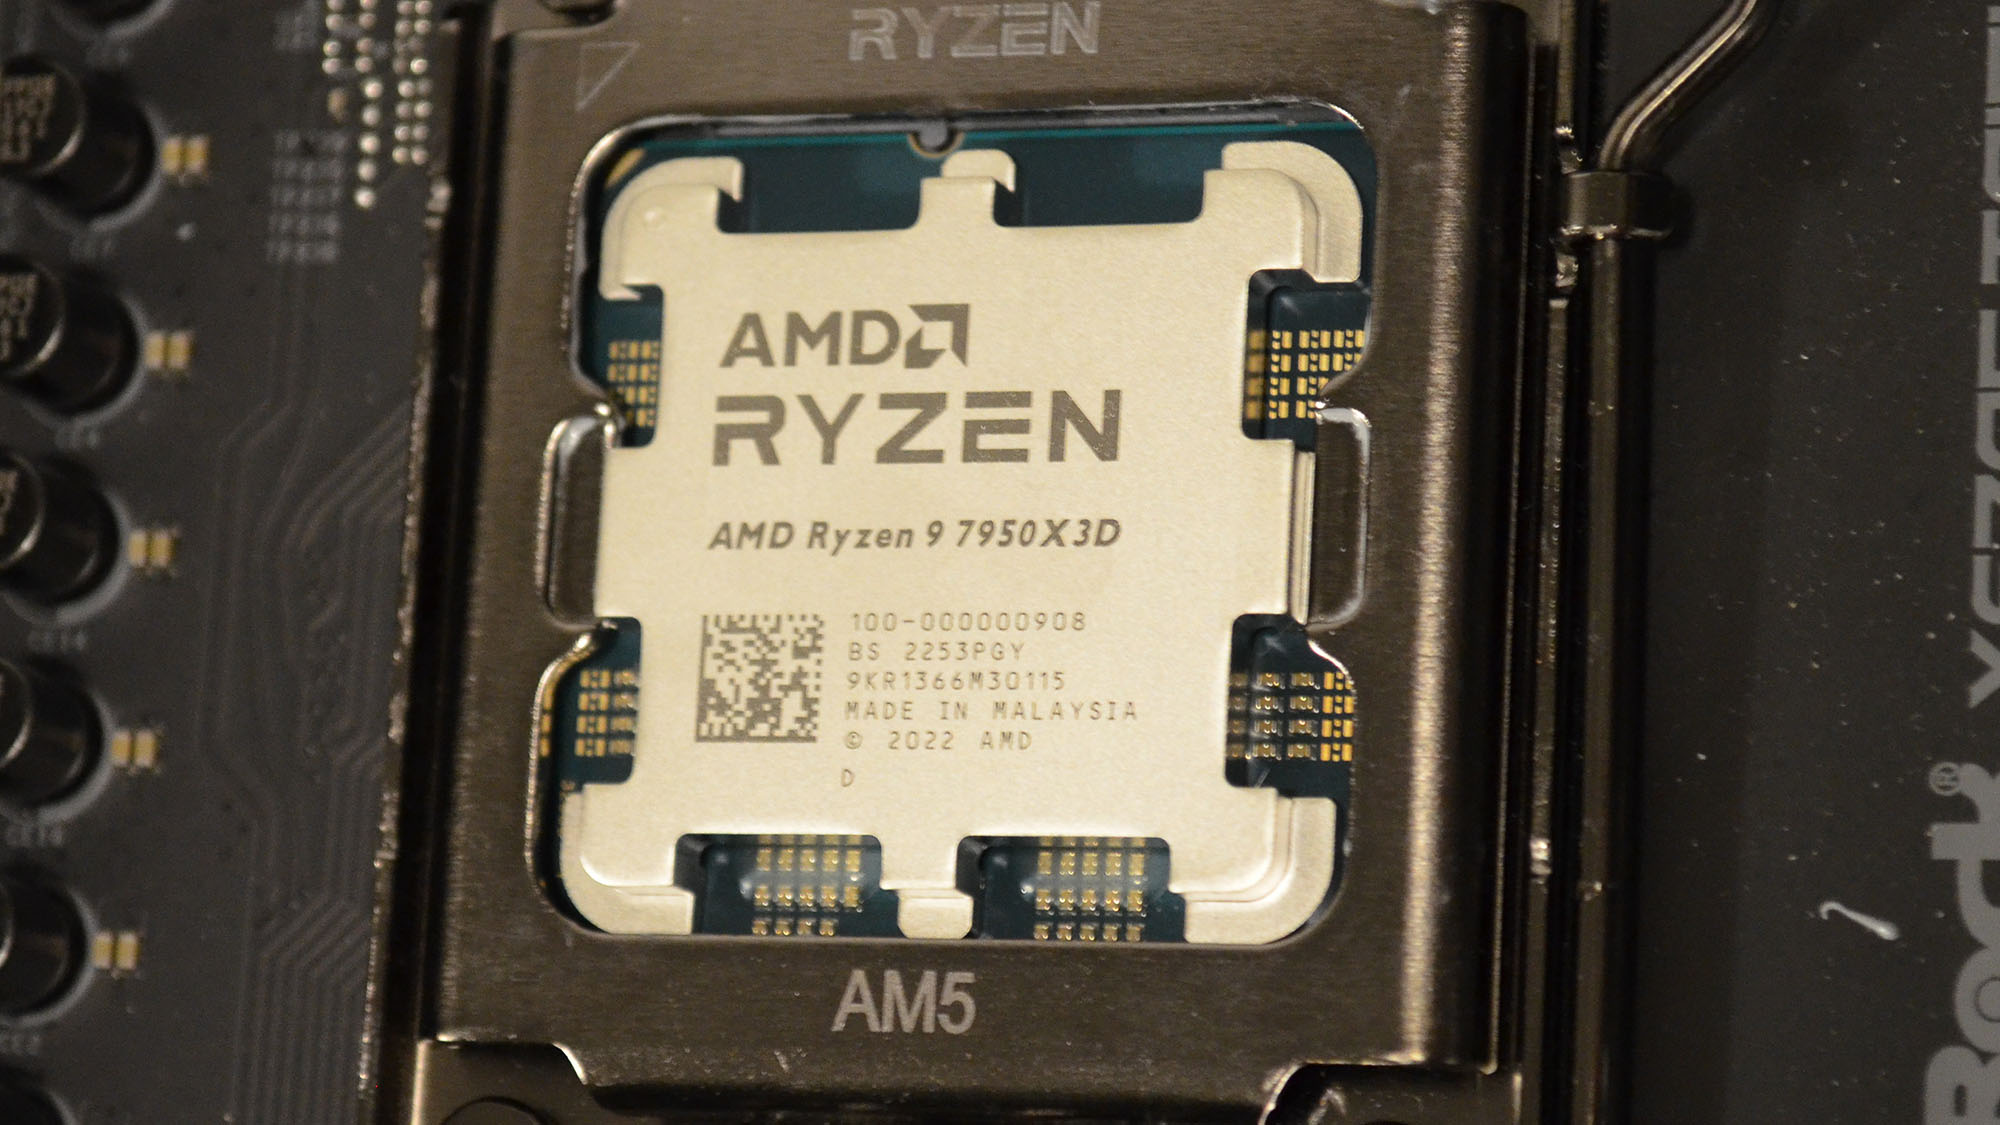 An AMD Ryzen 9 7950X3D slotted into a motherboard